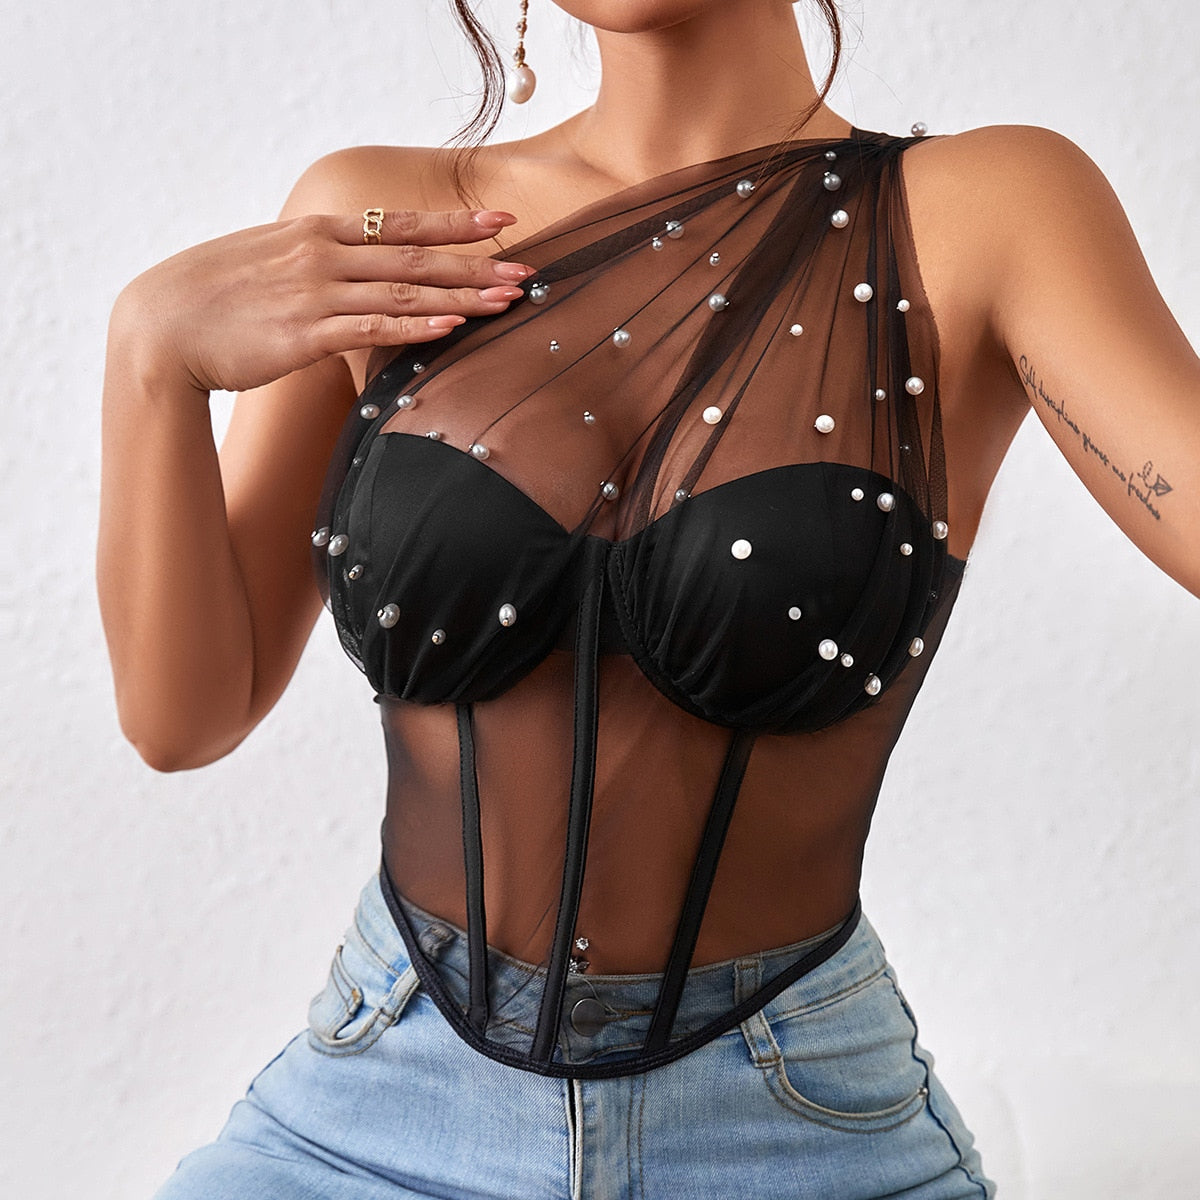 Pearl Enchantment Sheer Corset Bustier Top  Sunset and Swim   